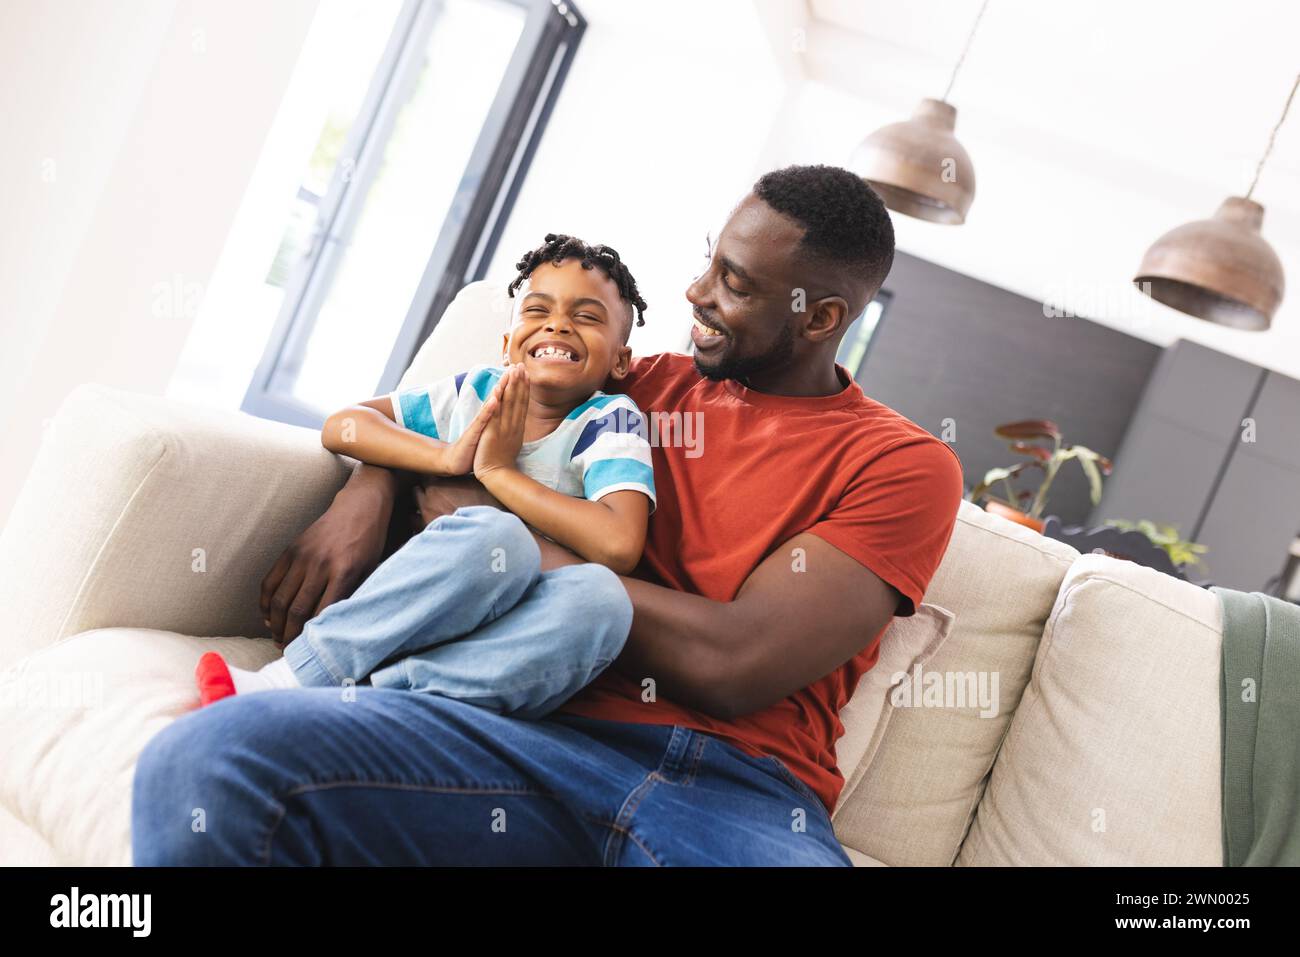 African American father and son share a joyful moment on a sofa Stock Photo